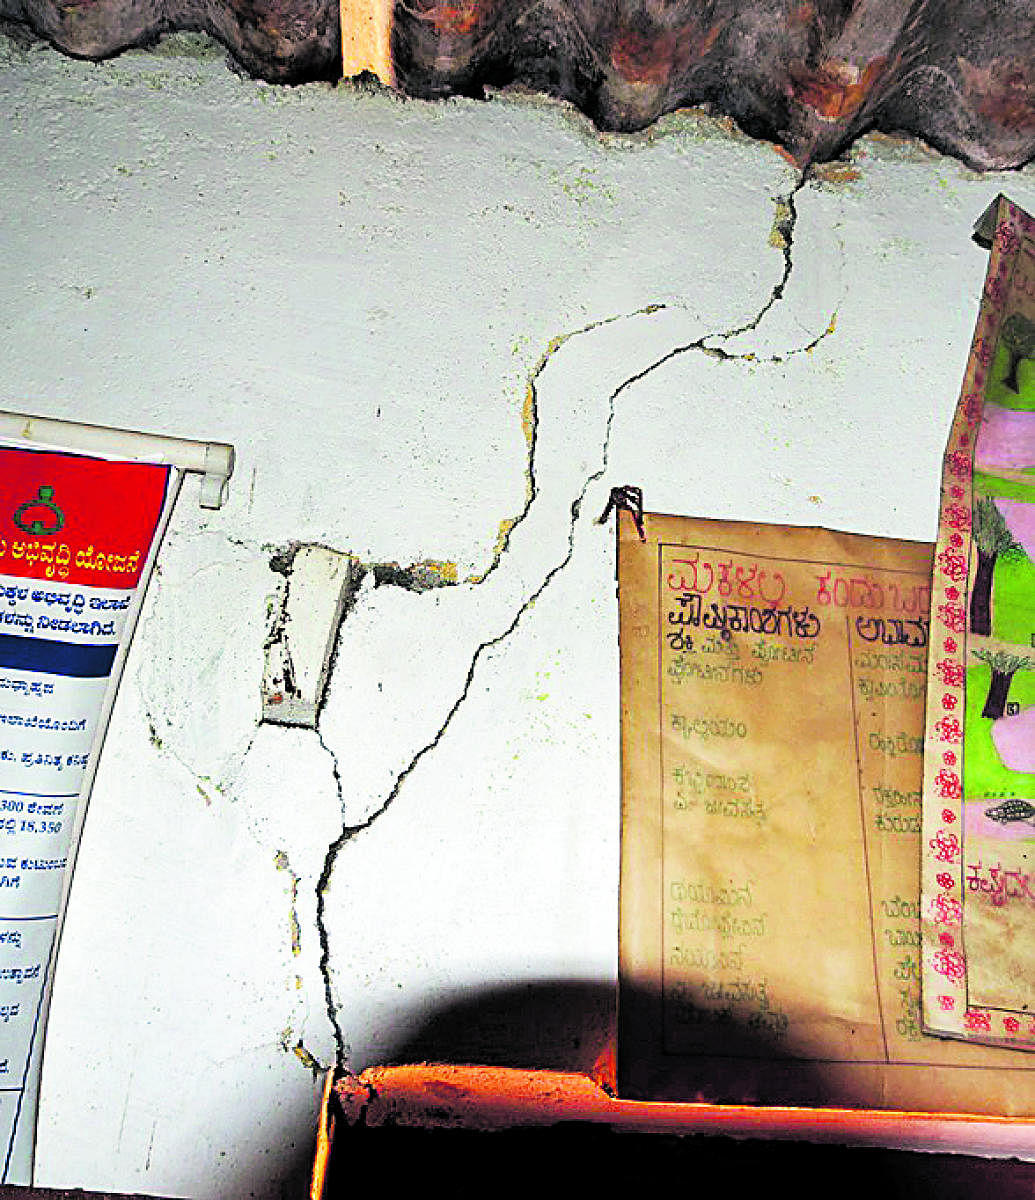 Anganwadi with cracked walls cries for attention